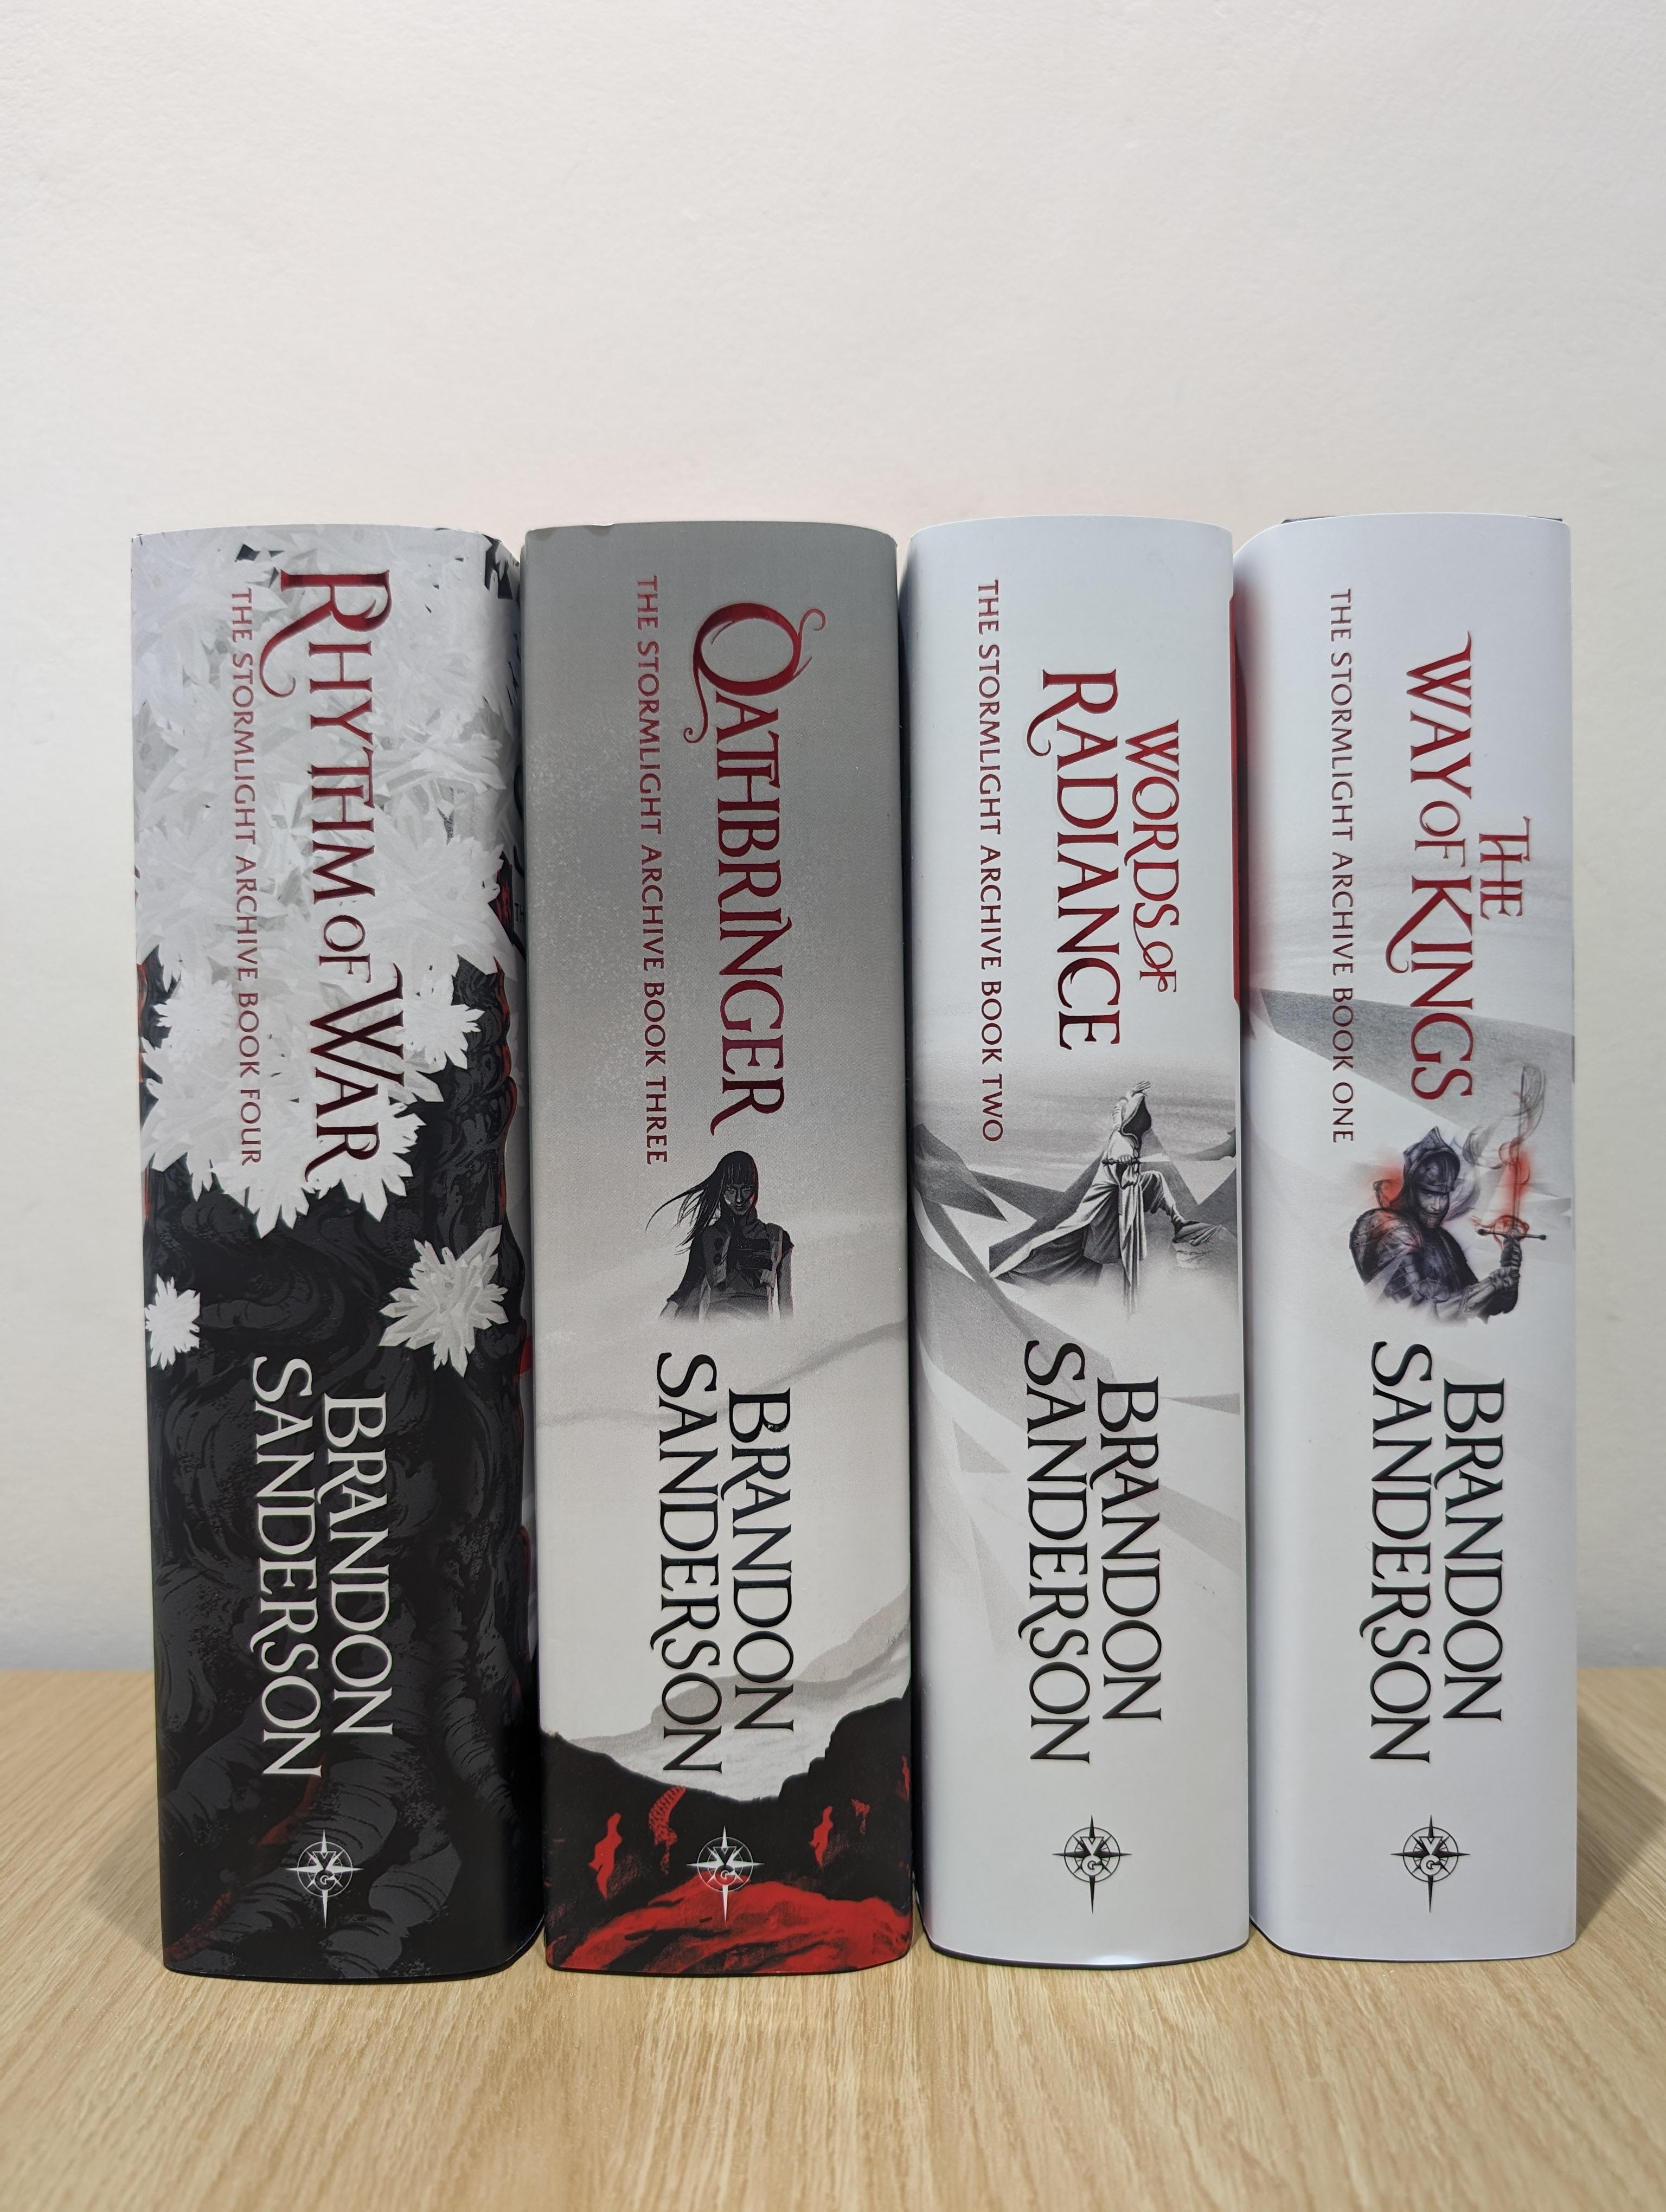 The Way of Kings, Part One (Stormlight Archive) - Brandon Sanderson:  9780575097360 - AbeBooks